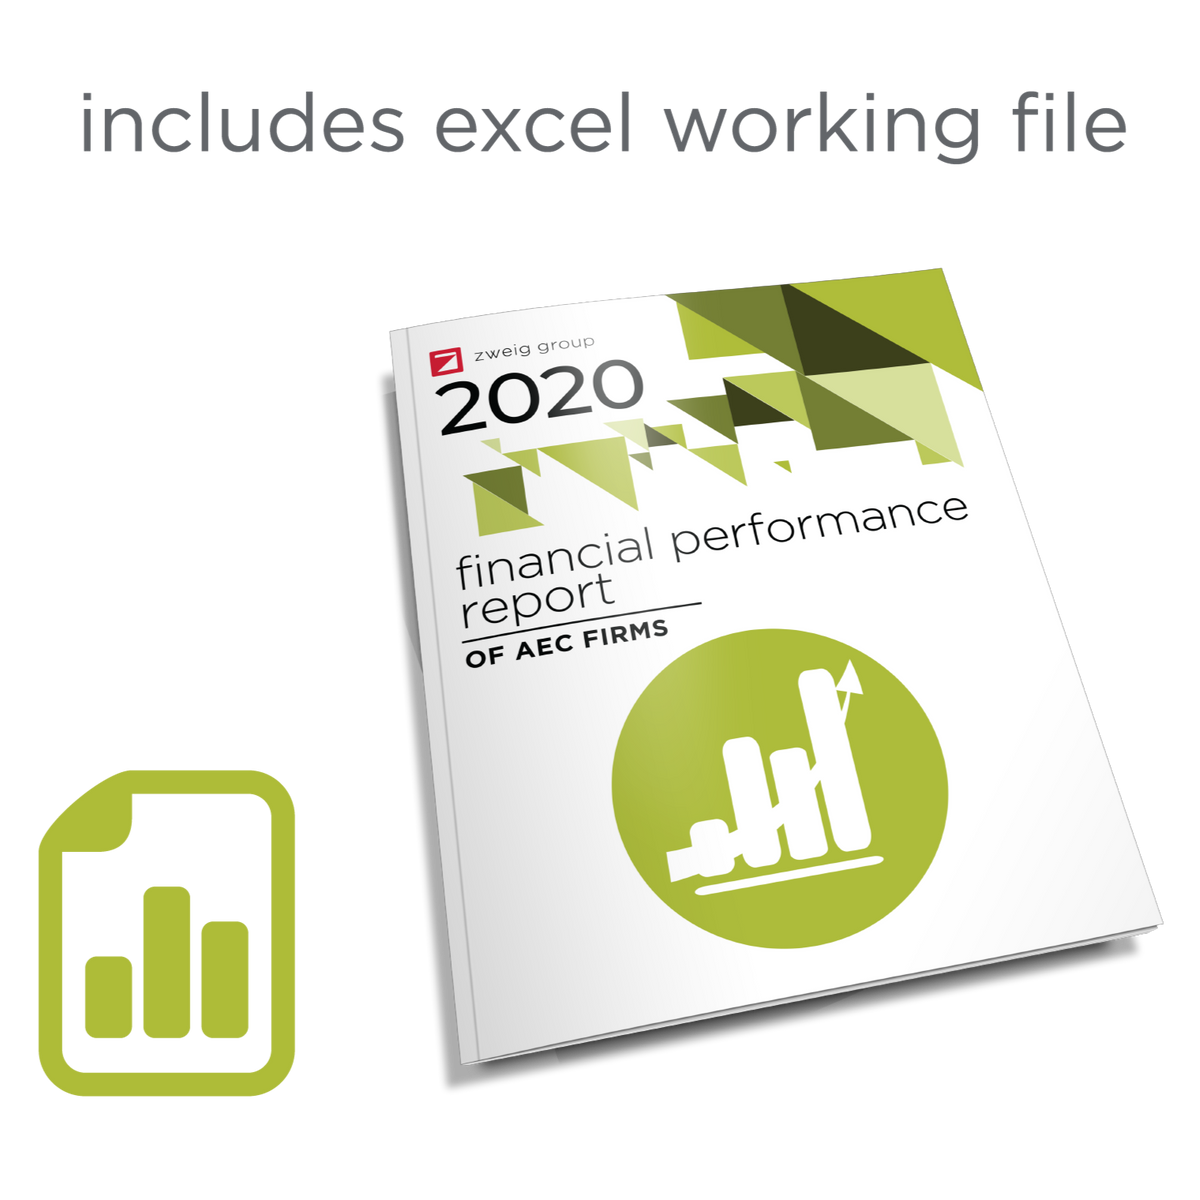 2020 Financial Performance Survey Report Benchmarking Package - with Excel working file Cover